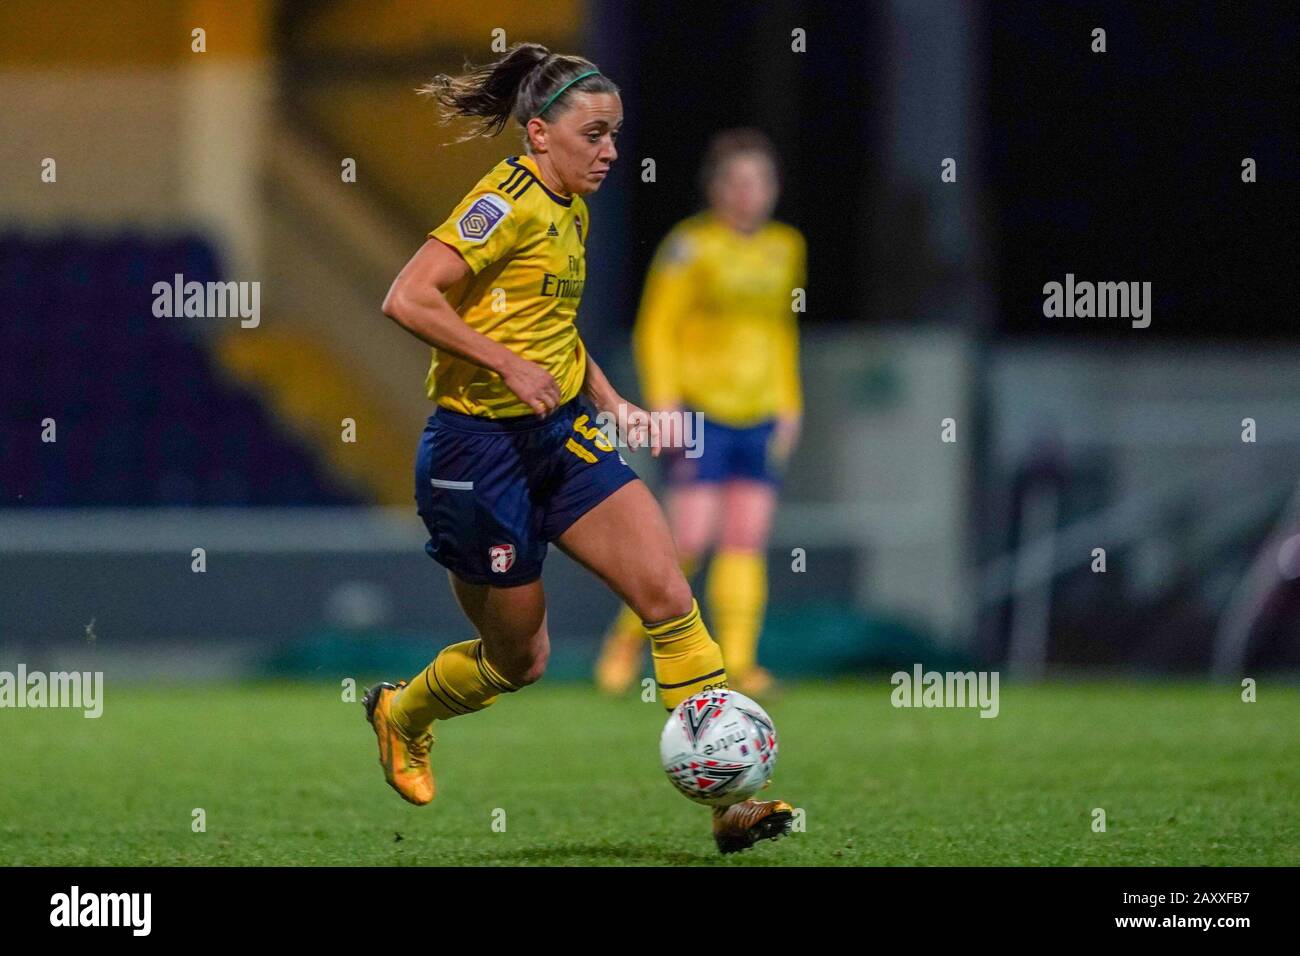 CHESTER. ENGLAND. FEB 13th: Katie McCabe of Arsenal on the ball  during the Women’s Super League game between Liverpool Women and Arsenal Women at The Deva Stadium in Chester, England. (Photo by Daniela Porcelli/SPP) Stock Photo